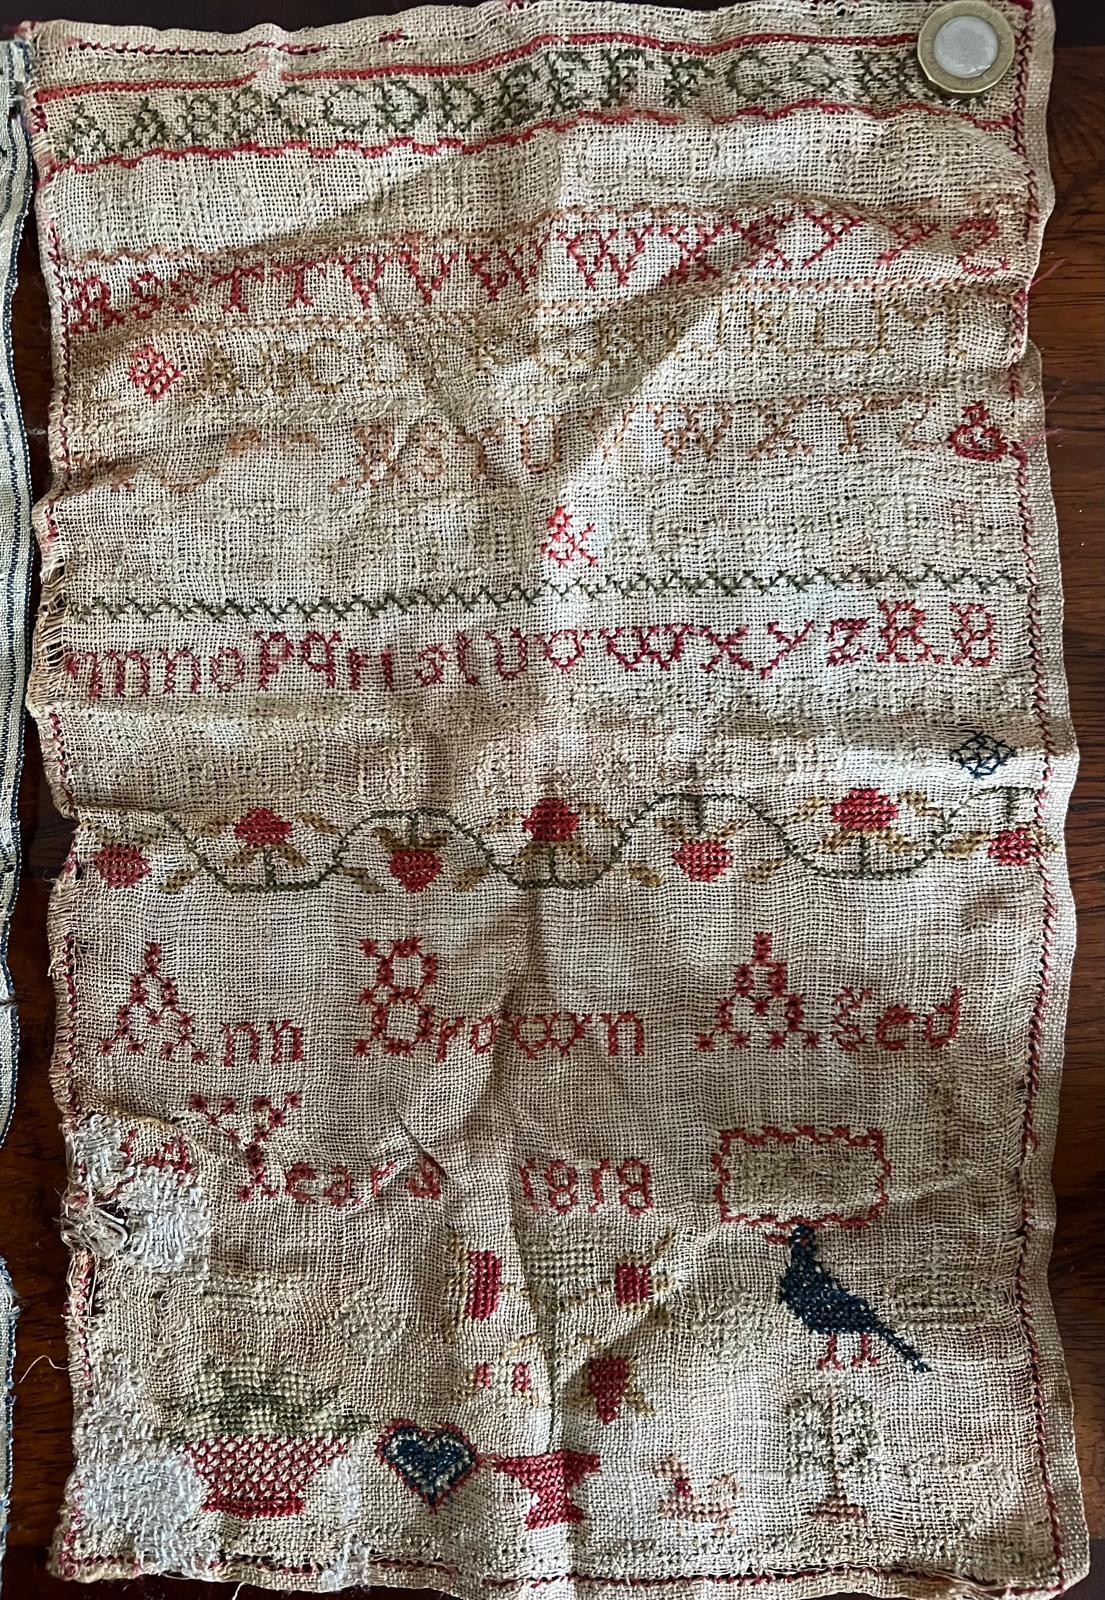 SMALL FRAMED SAMPLER, APPROX 19 x 19cm, PLUS THREE OTHERS, ONE DATED 1818, APPROX 39.5 x 24.5cm - Image 2 of 3